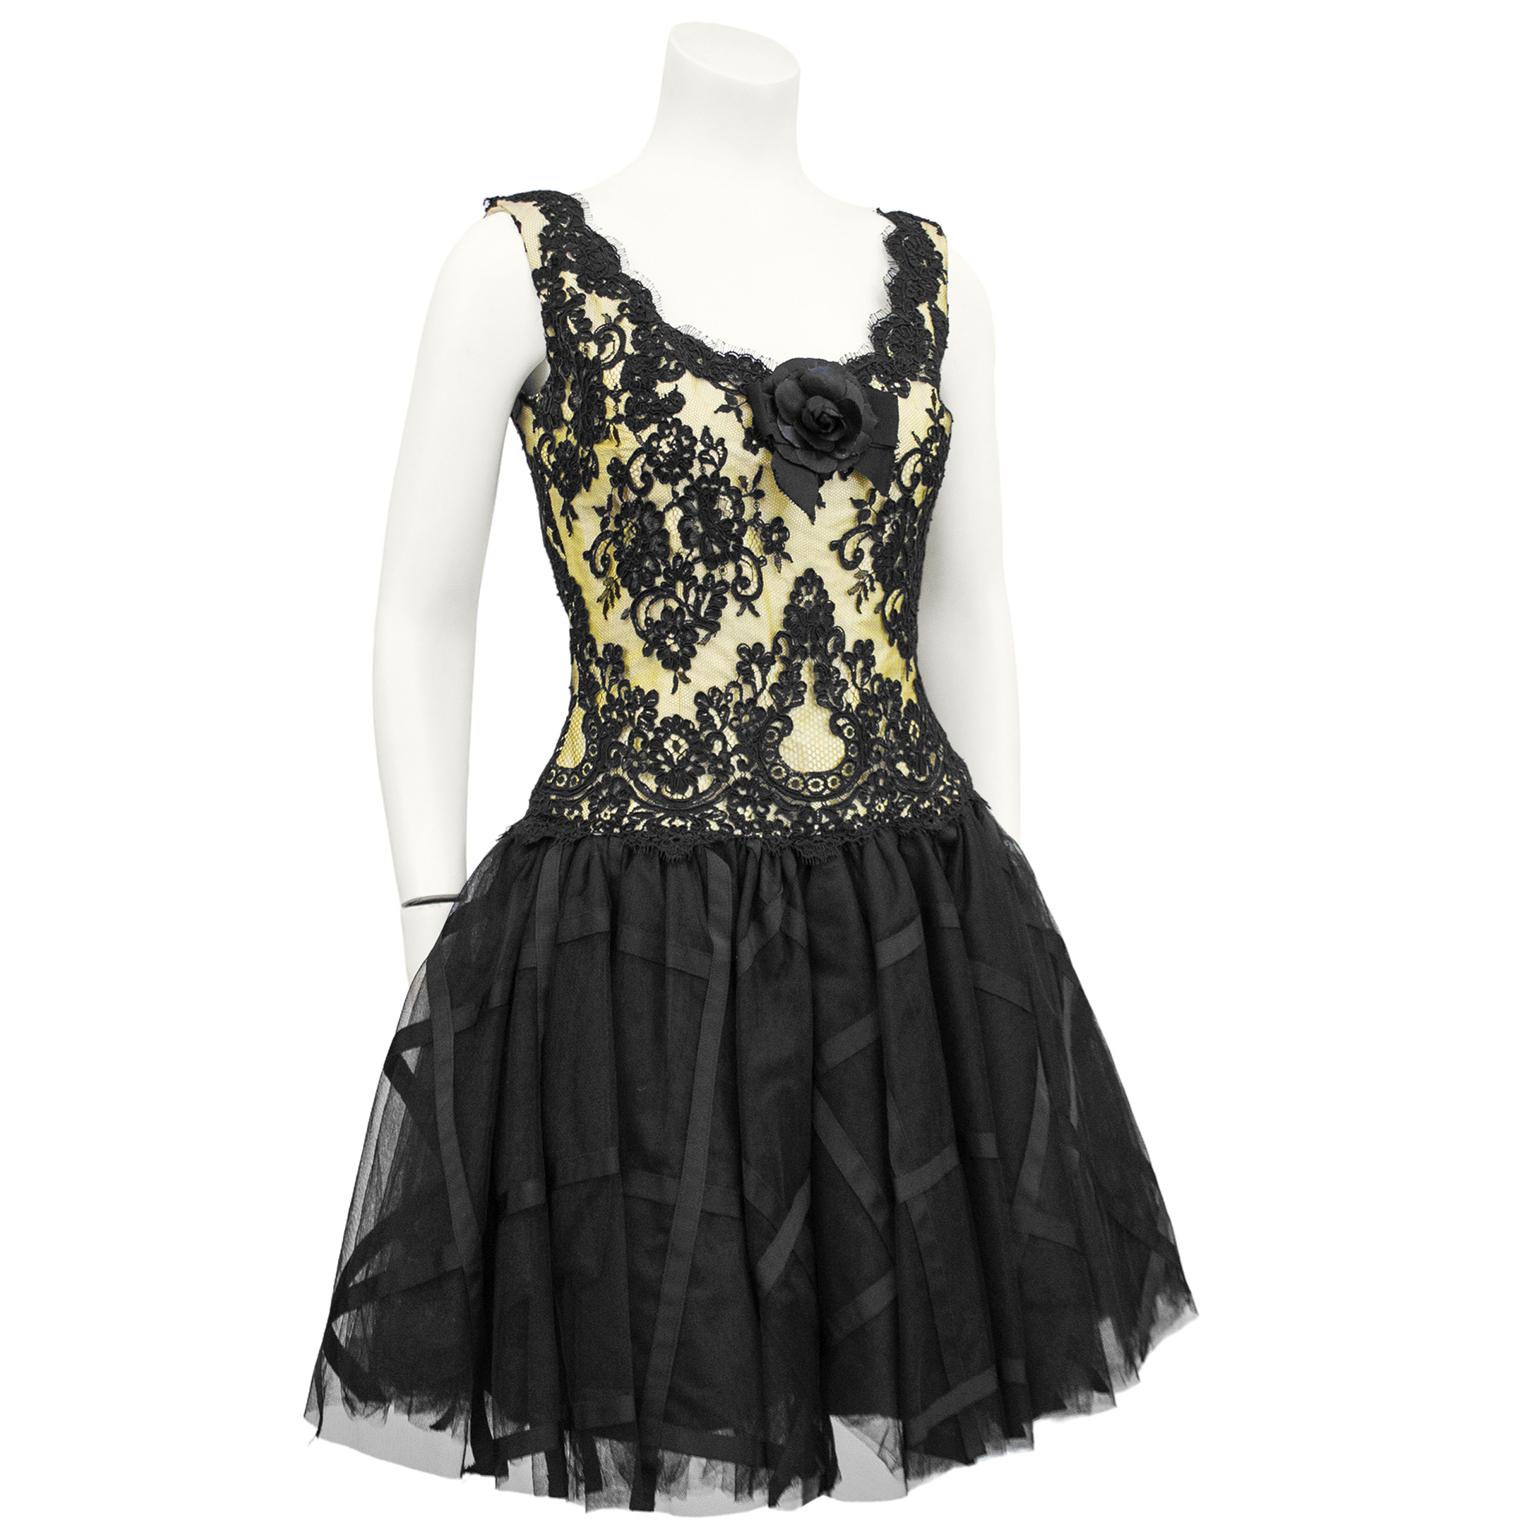 1990's Chris Kole cocktail dress. Bodice features yellow fabric under black lace with rosette and bow at centre of open sweetheart  neck. Lace scalloped  at neckline and low back. Drop waist. Skirt is a short tutu style  made from tulle and satin